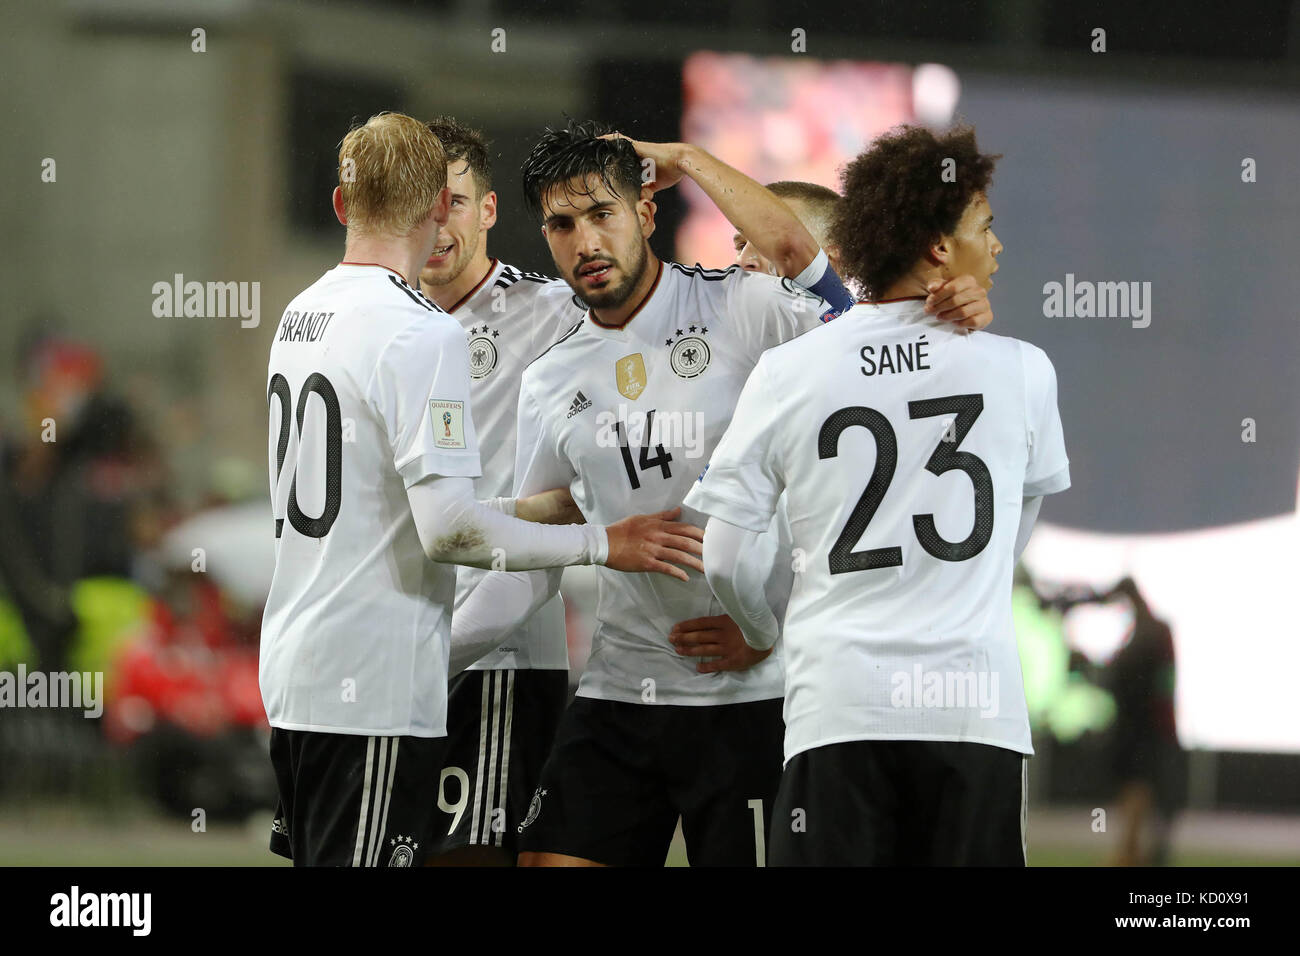 Kaiserslautern, Germany. 8th Oct, 2017. Emre Can (C) of Germany celebrates with teammates after scoring during the FIFA 2018 World Cup Qualifiers Group C match between Germany and Azerbaijan at Fritz Walter Stadium in Kaiserslautern, Germany, on Oct. 8, 2017. Germany won 5-1. Credit: Ulrich Hufnagel/Xinhua/Alamy Live News Stock Photo